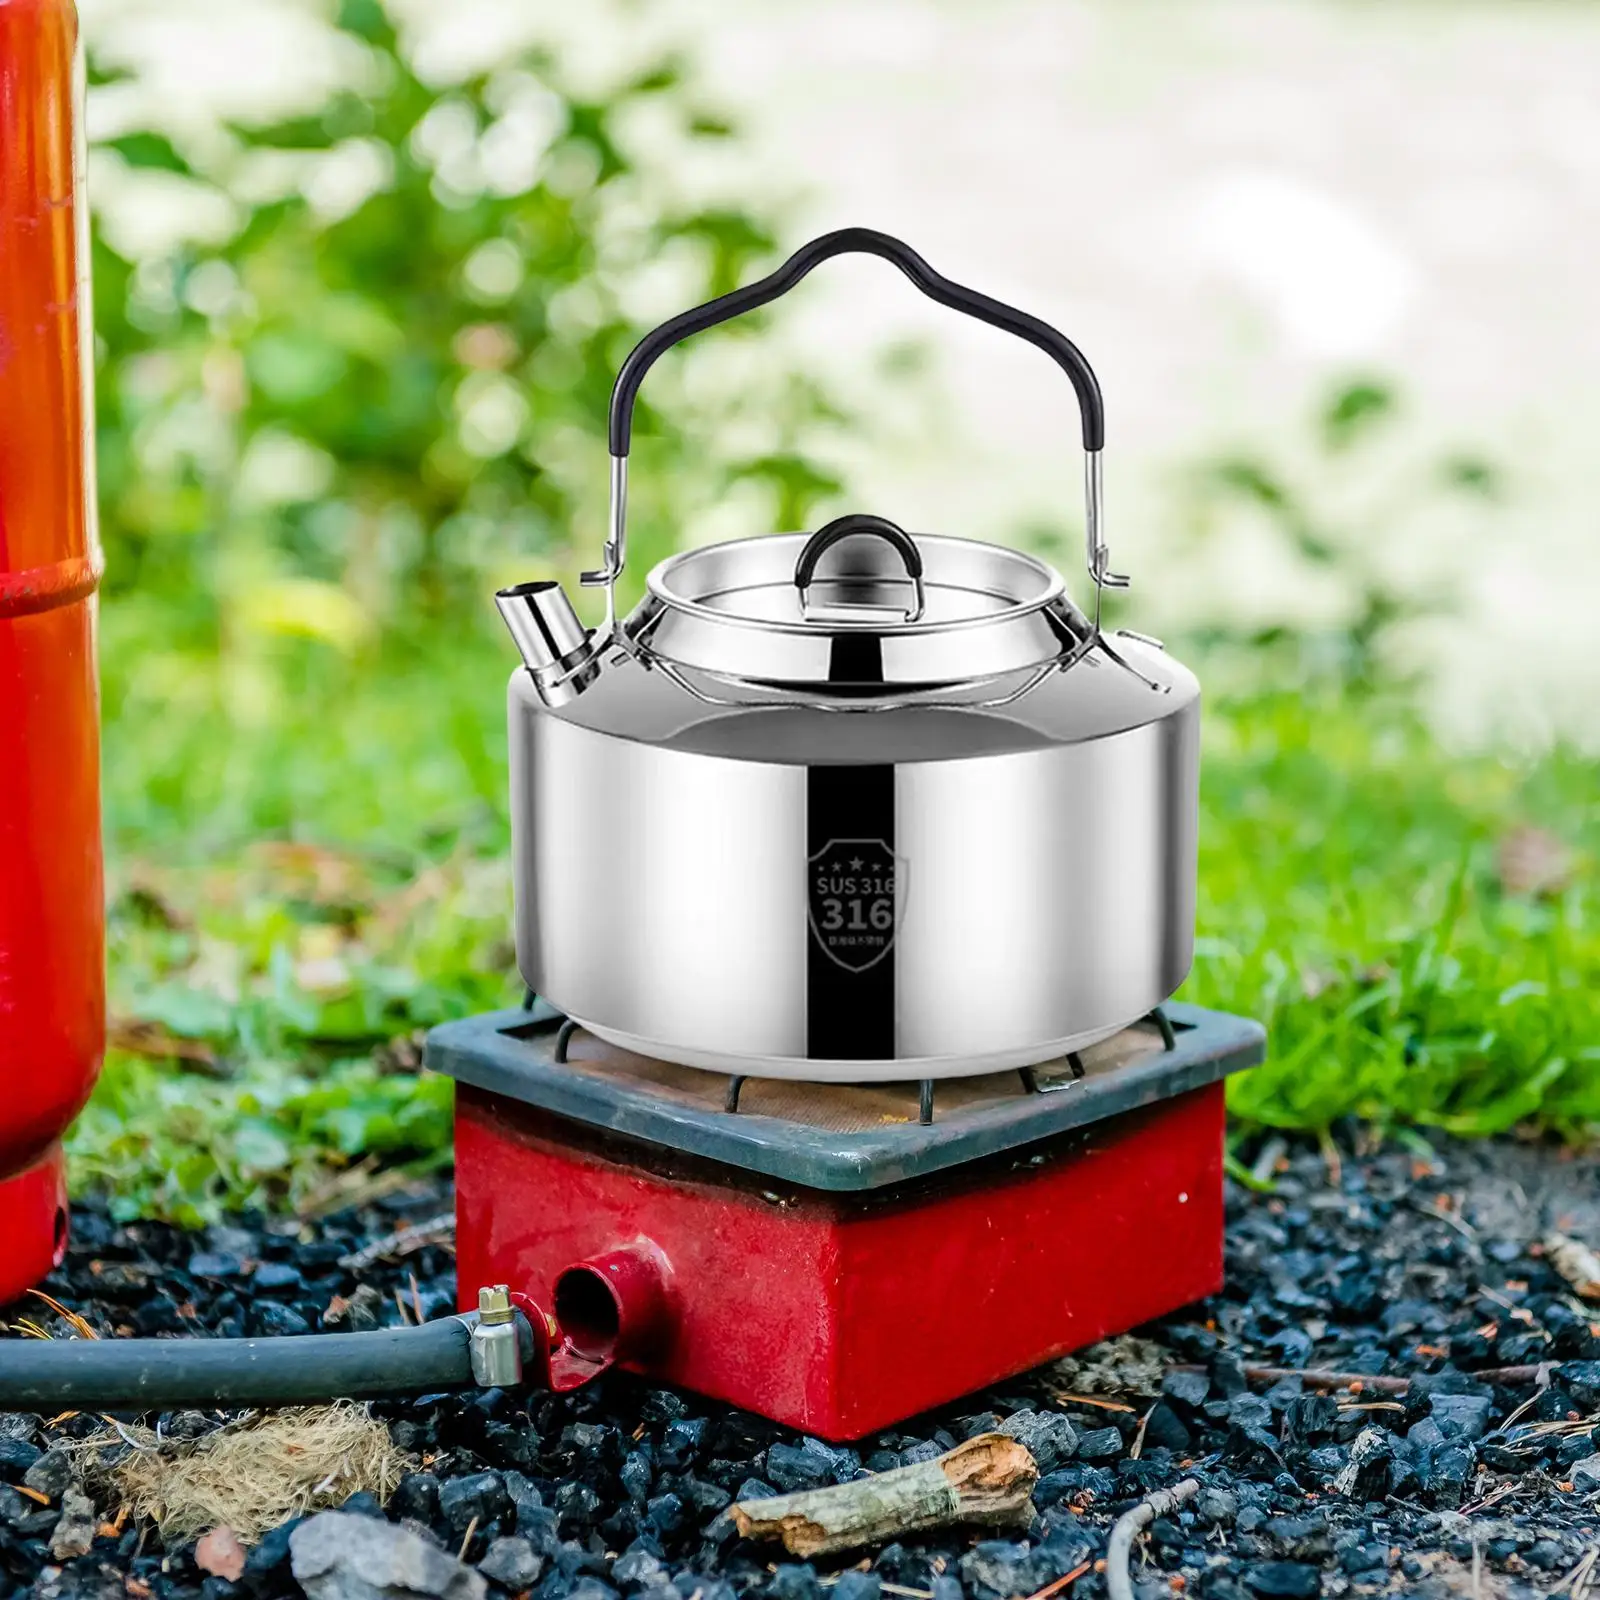 Camping Water Kettle Anti Scald Handle Portable Cook Pot Tea Kettle Water Boiler for Garden Picnic Mountaineering Campfire